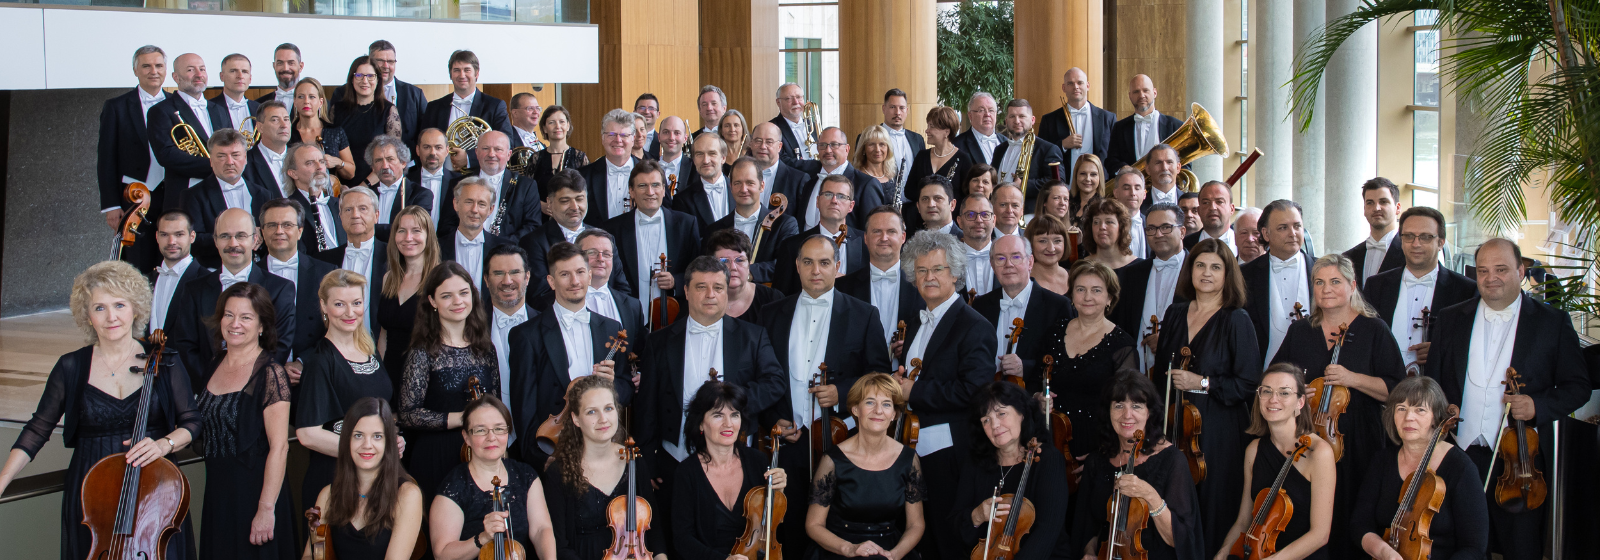 II. Haydneum Festival of Sacred Music – Concert of the Hungarian National Philharmonic Orchestra